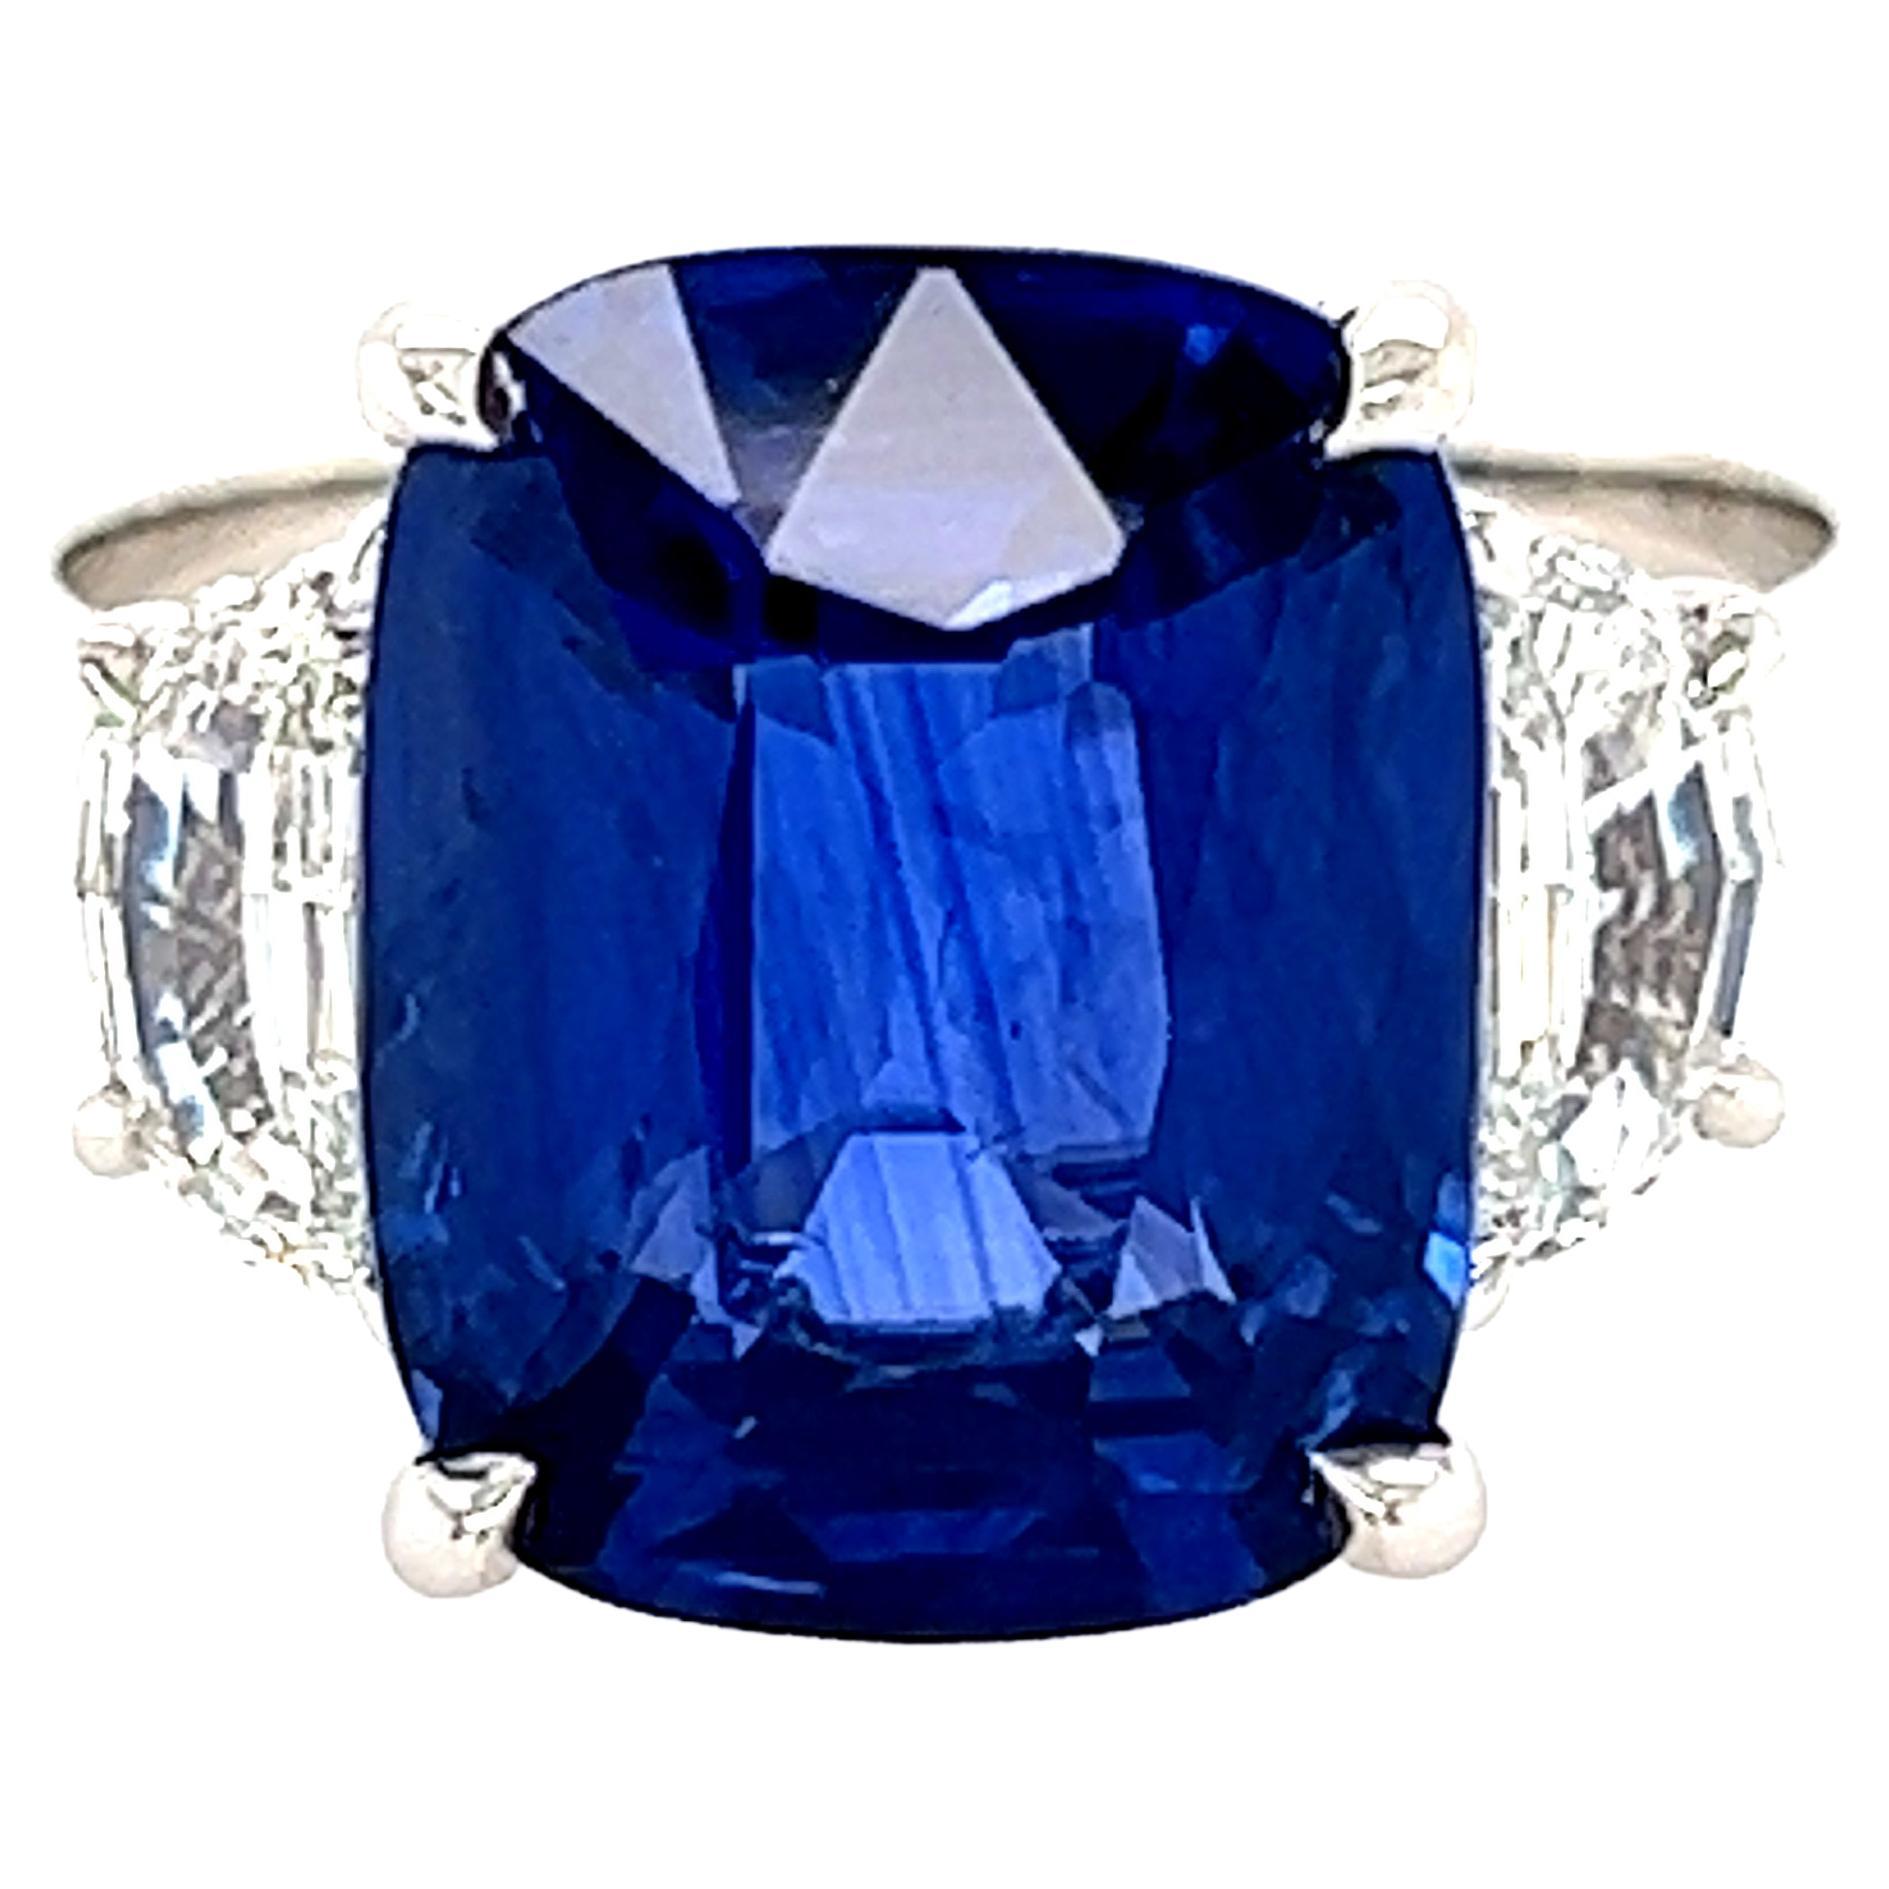 5 Carat Cushion Cut Blue Sapphire and Diamond Ring For Sale at 1stDibs